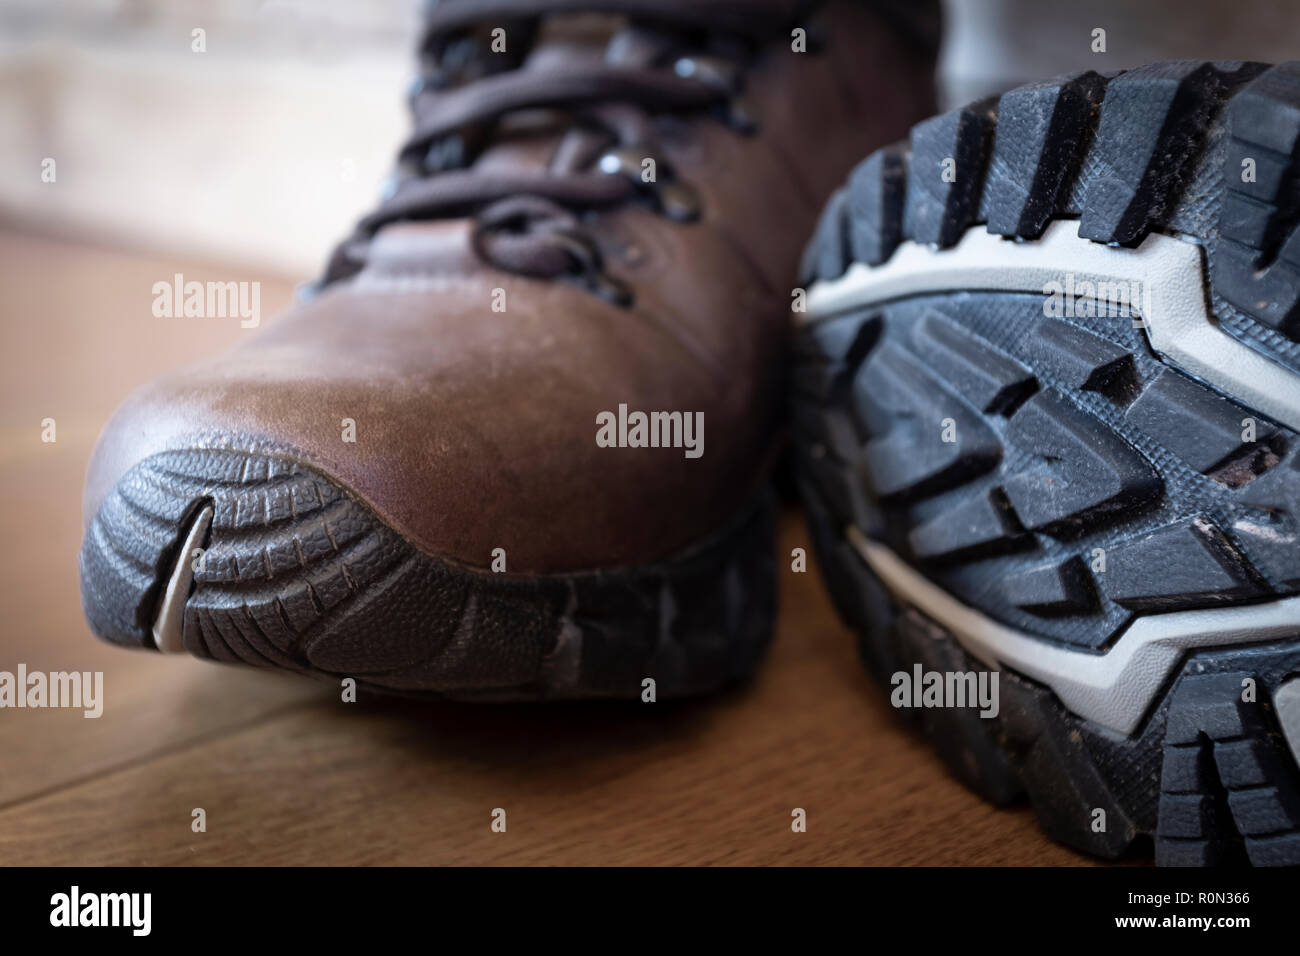 Deep tread lugs on the soles of a new pair of walking boots. Stock Photo